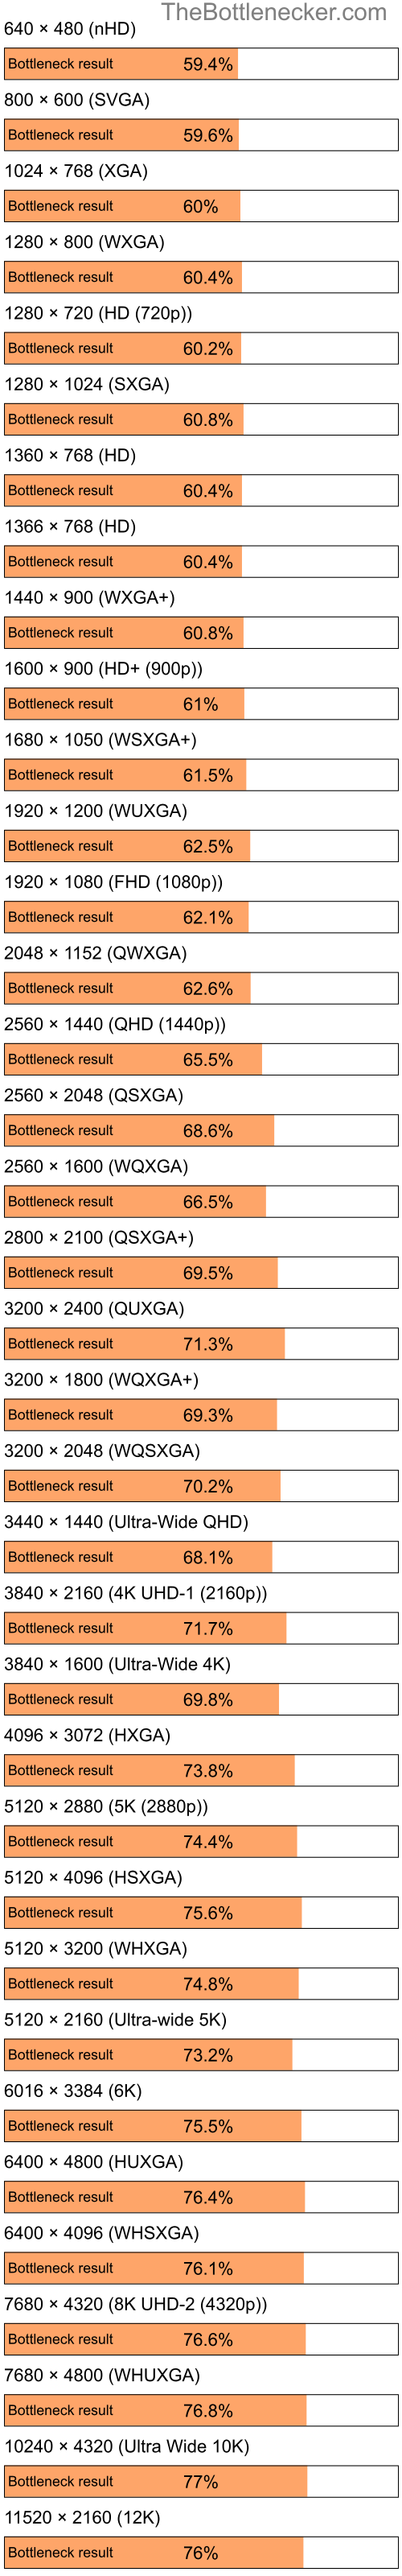 Bottleneck results by resolution for Intel Pentium 4 and AMD M880G with Mobility Radeon HD 4200 in General Tasks